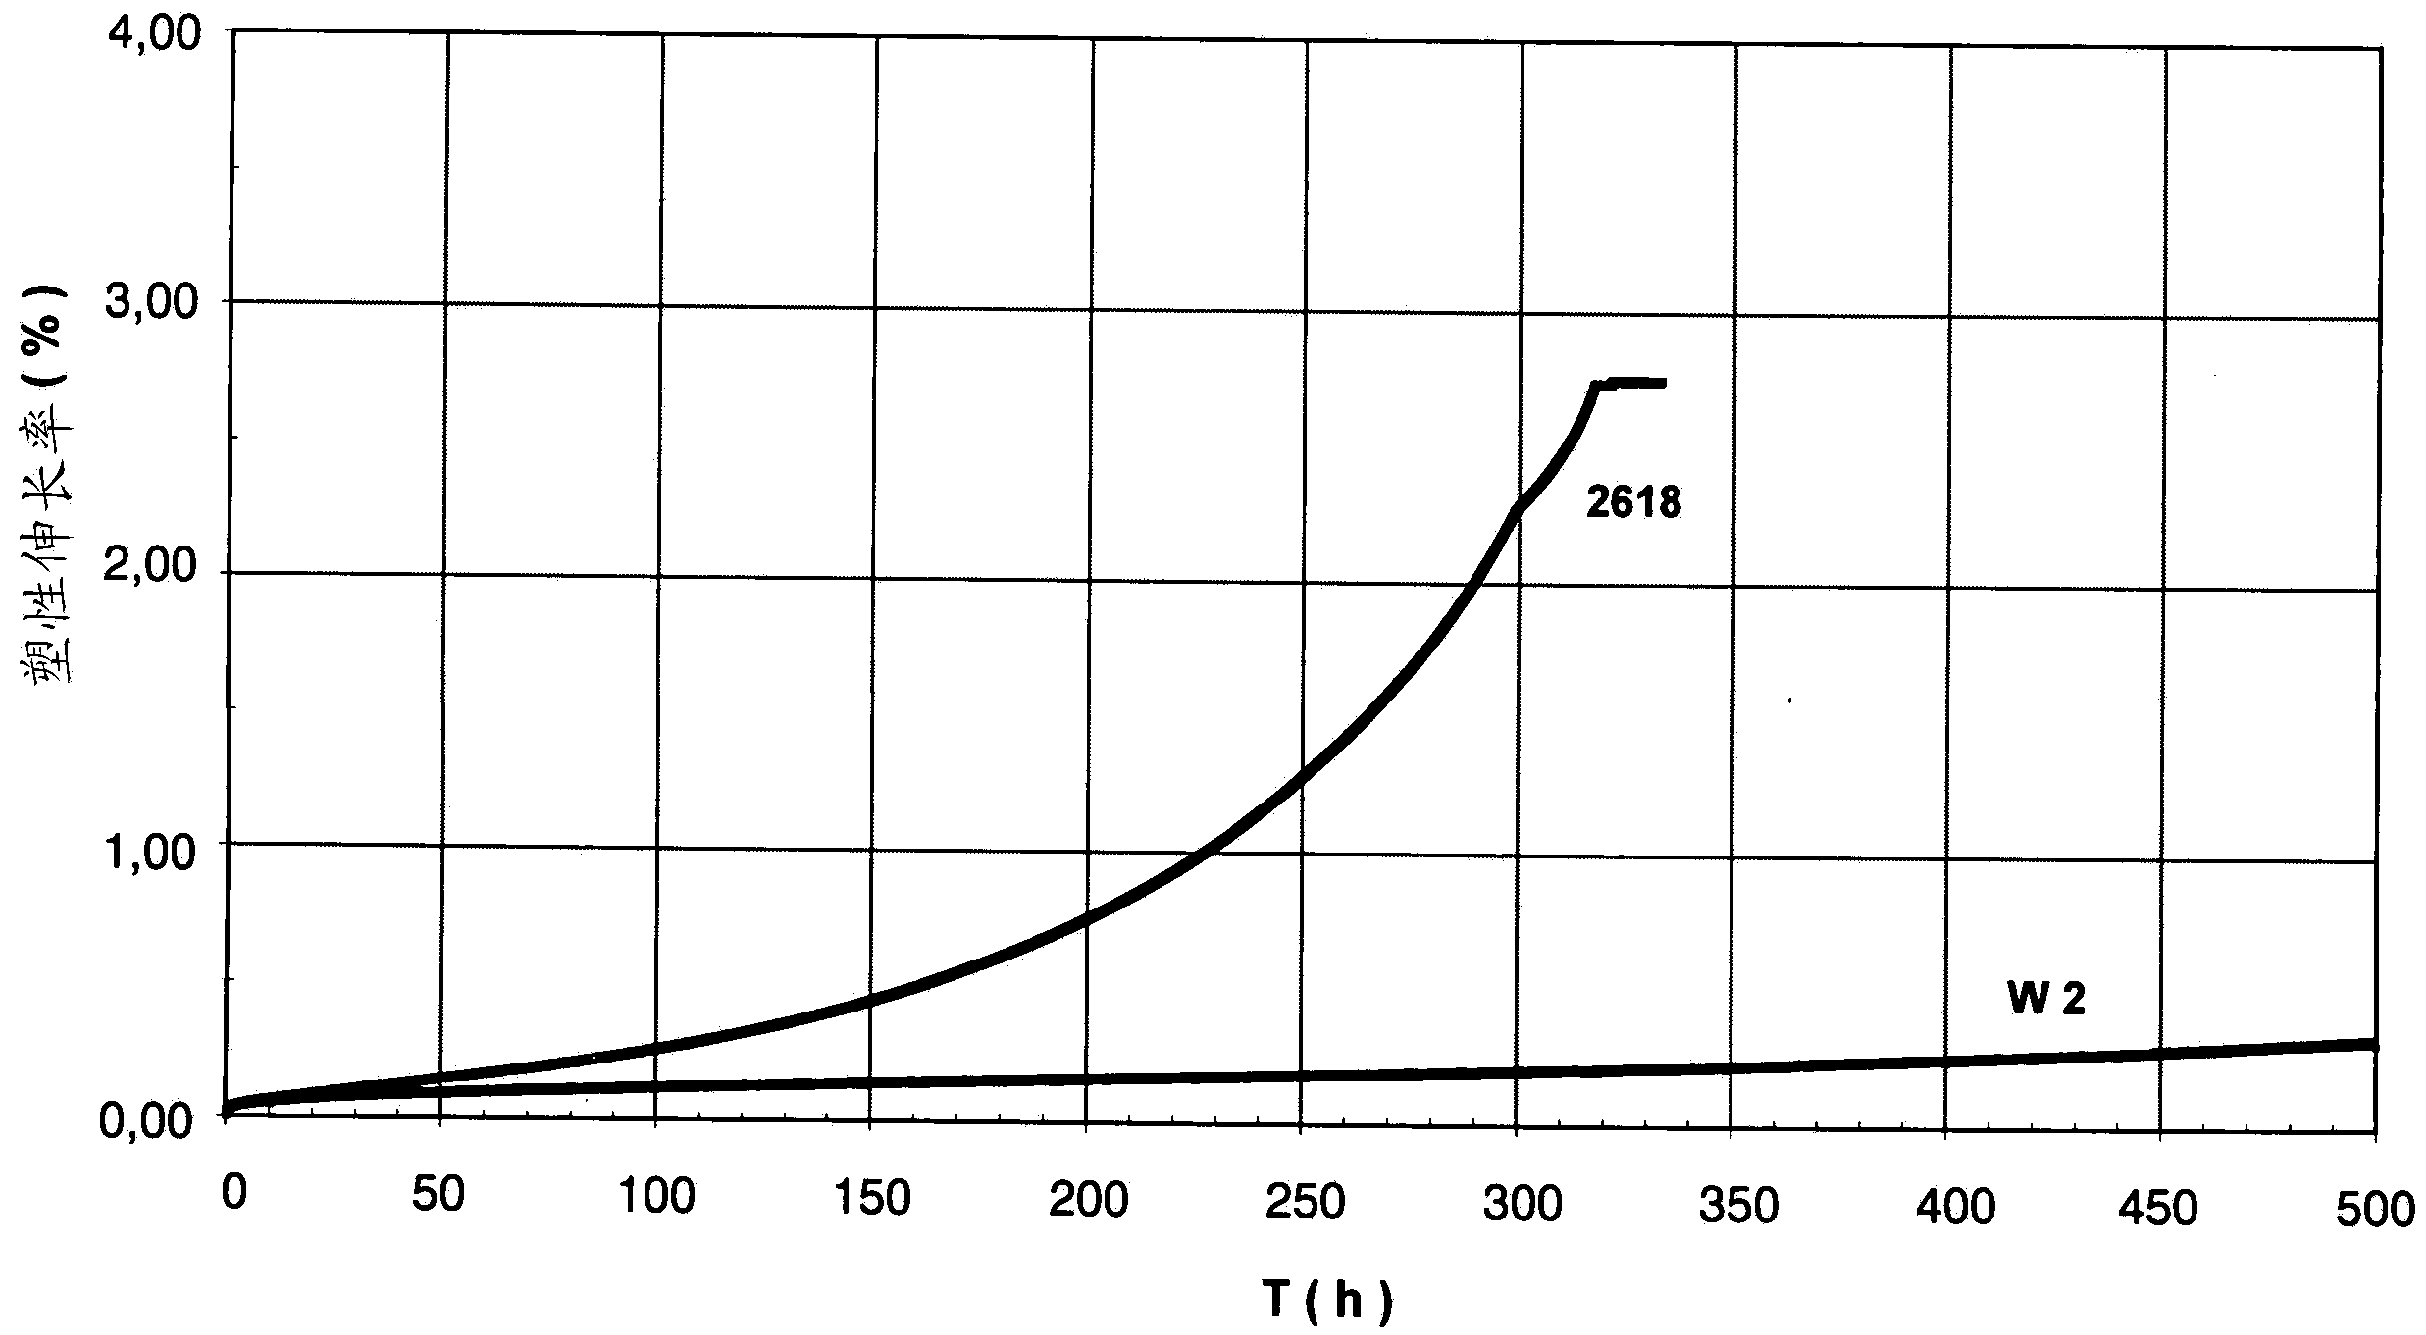 Heat-resistant Al-Cu-Mg-Ag alloy and process for producing a semifinished part or product composed of such an aluminium alloy